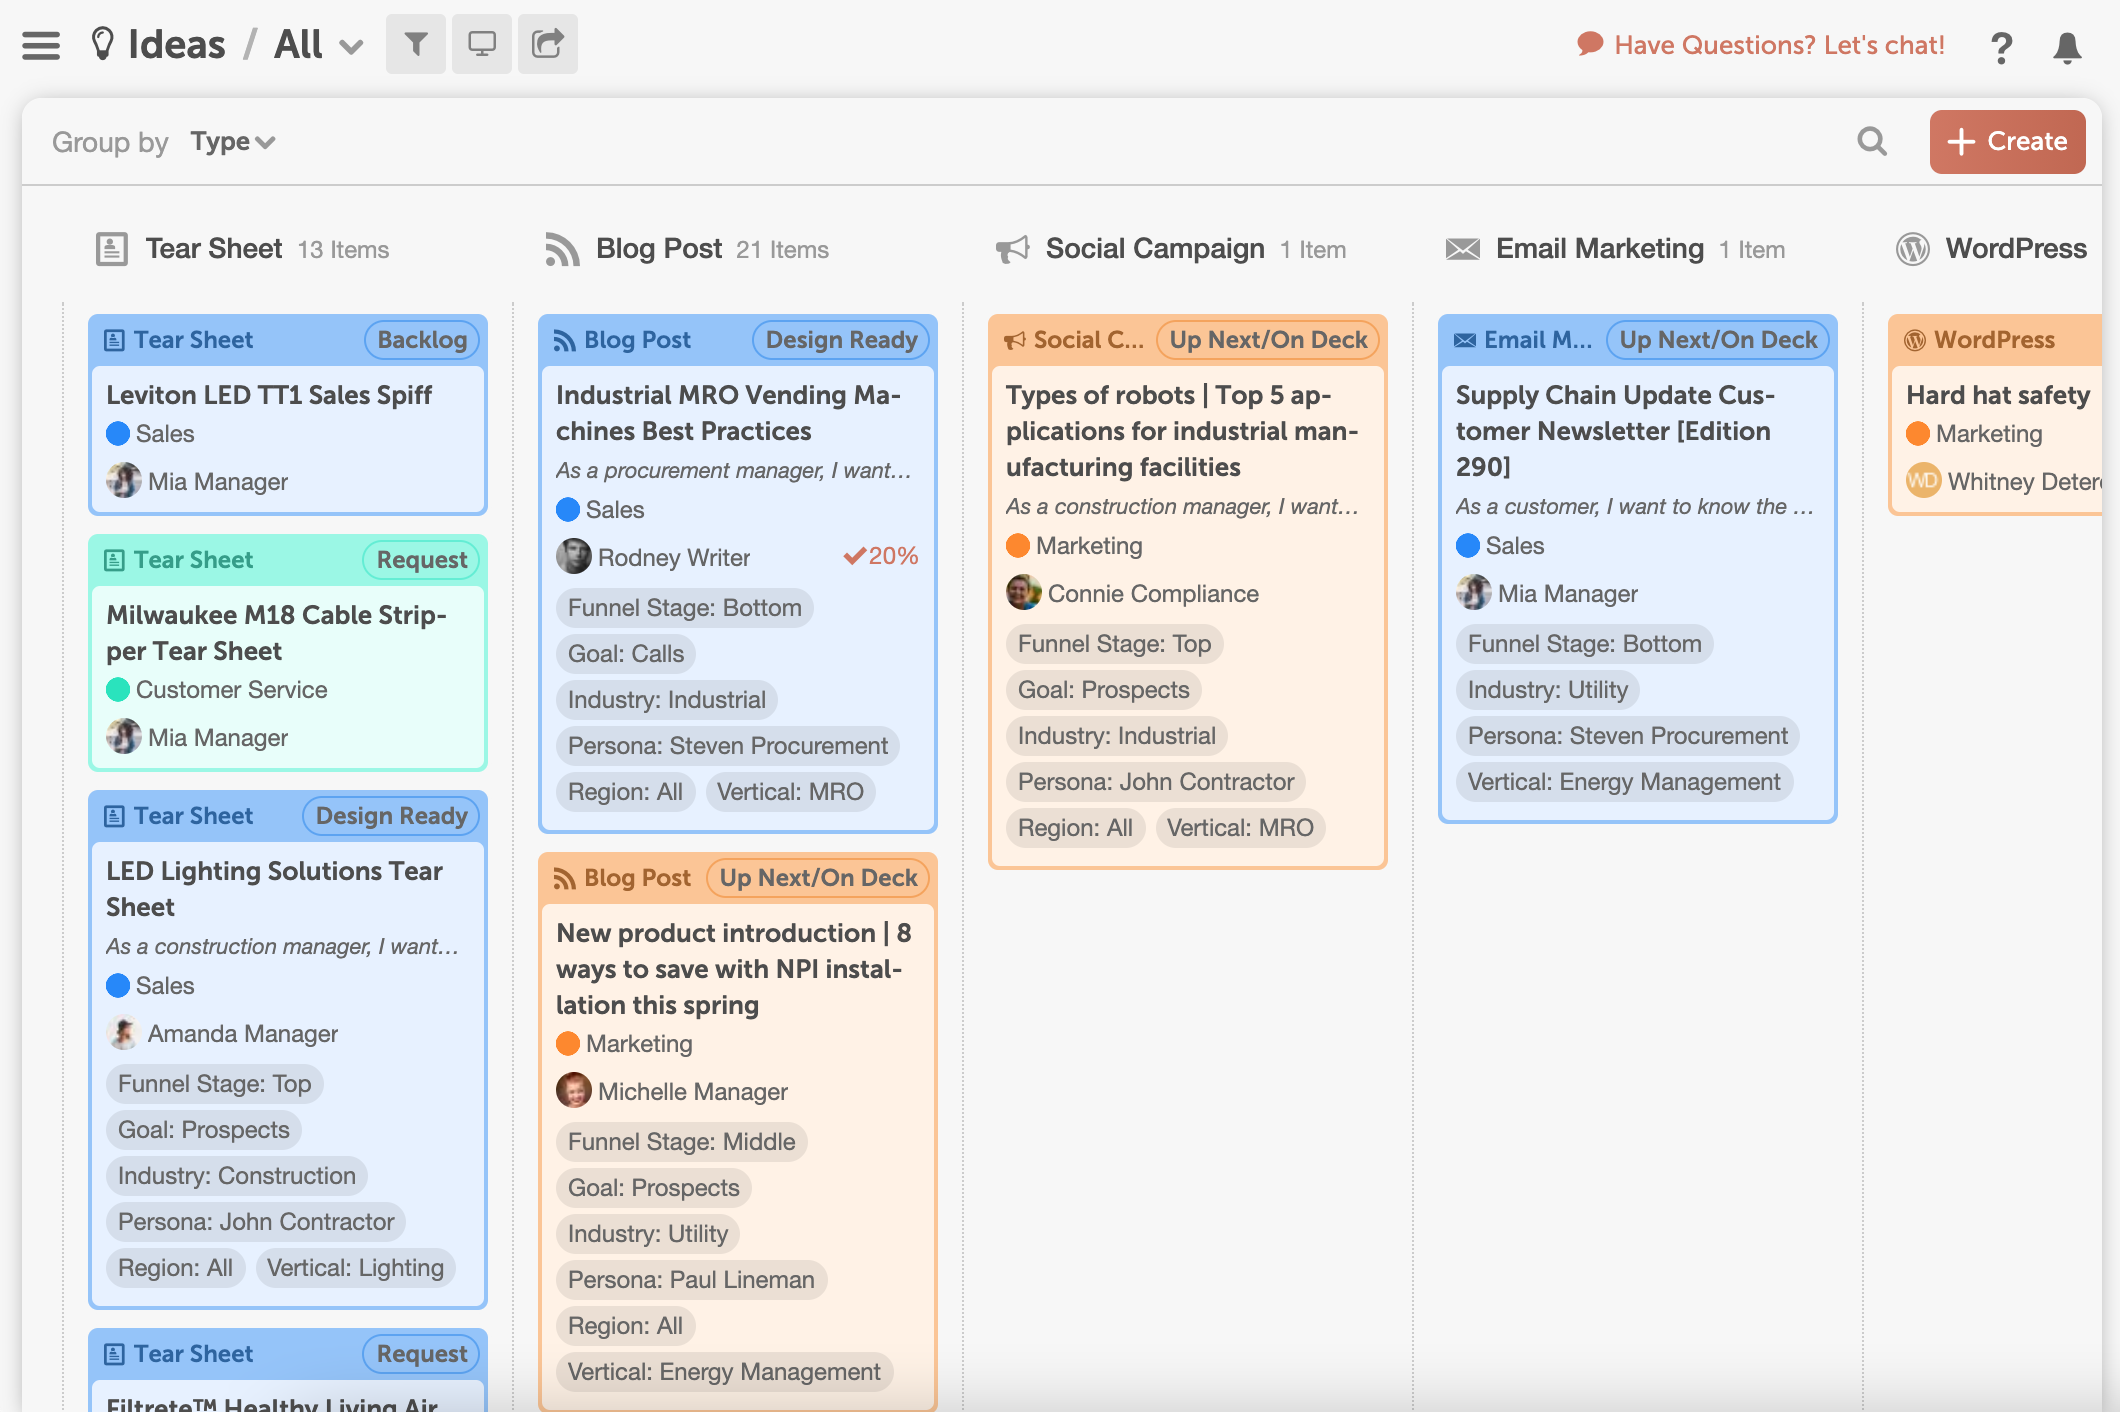 CoSchedule Software - Idea Board: Write down your ideas, take in requests, and prioritize the projects that are “up-next”, before giving them a publish date and putting them on the calendar organizer.